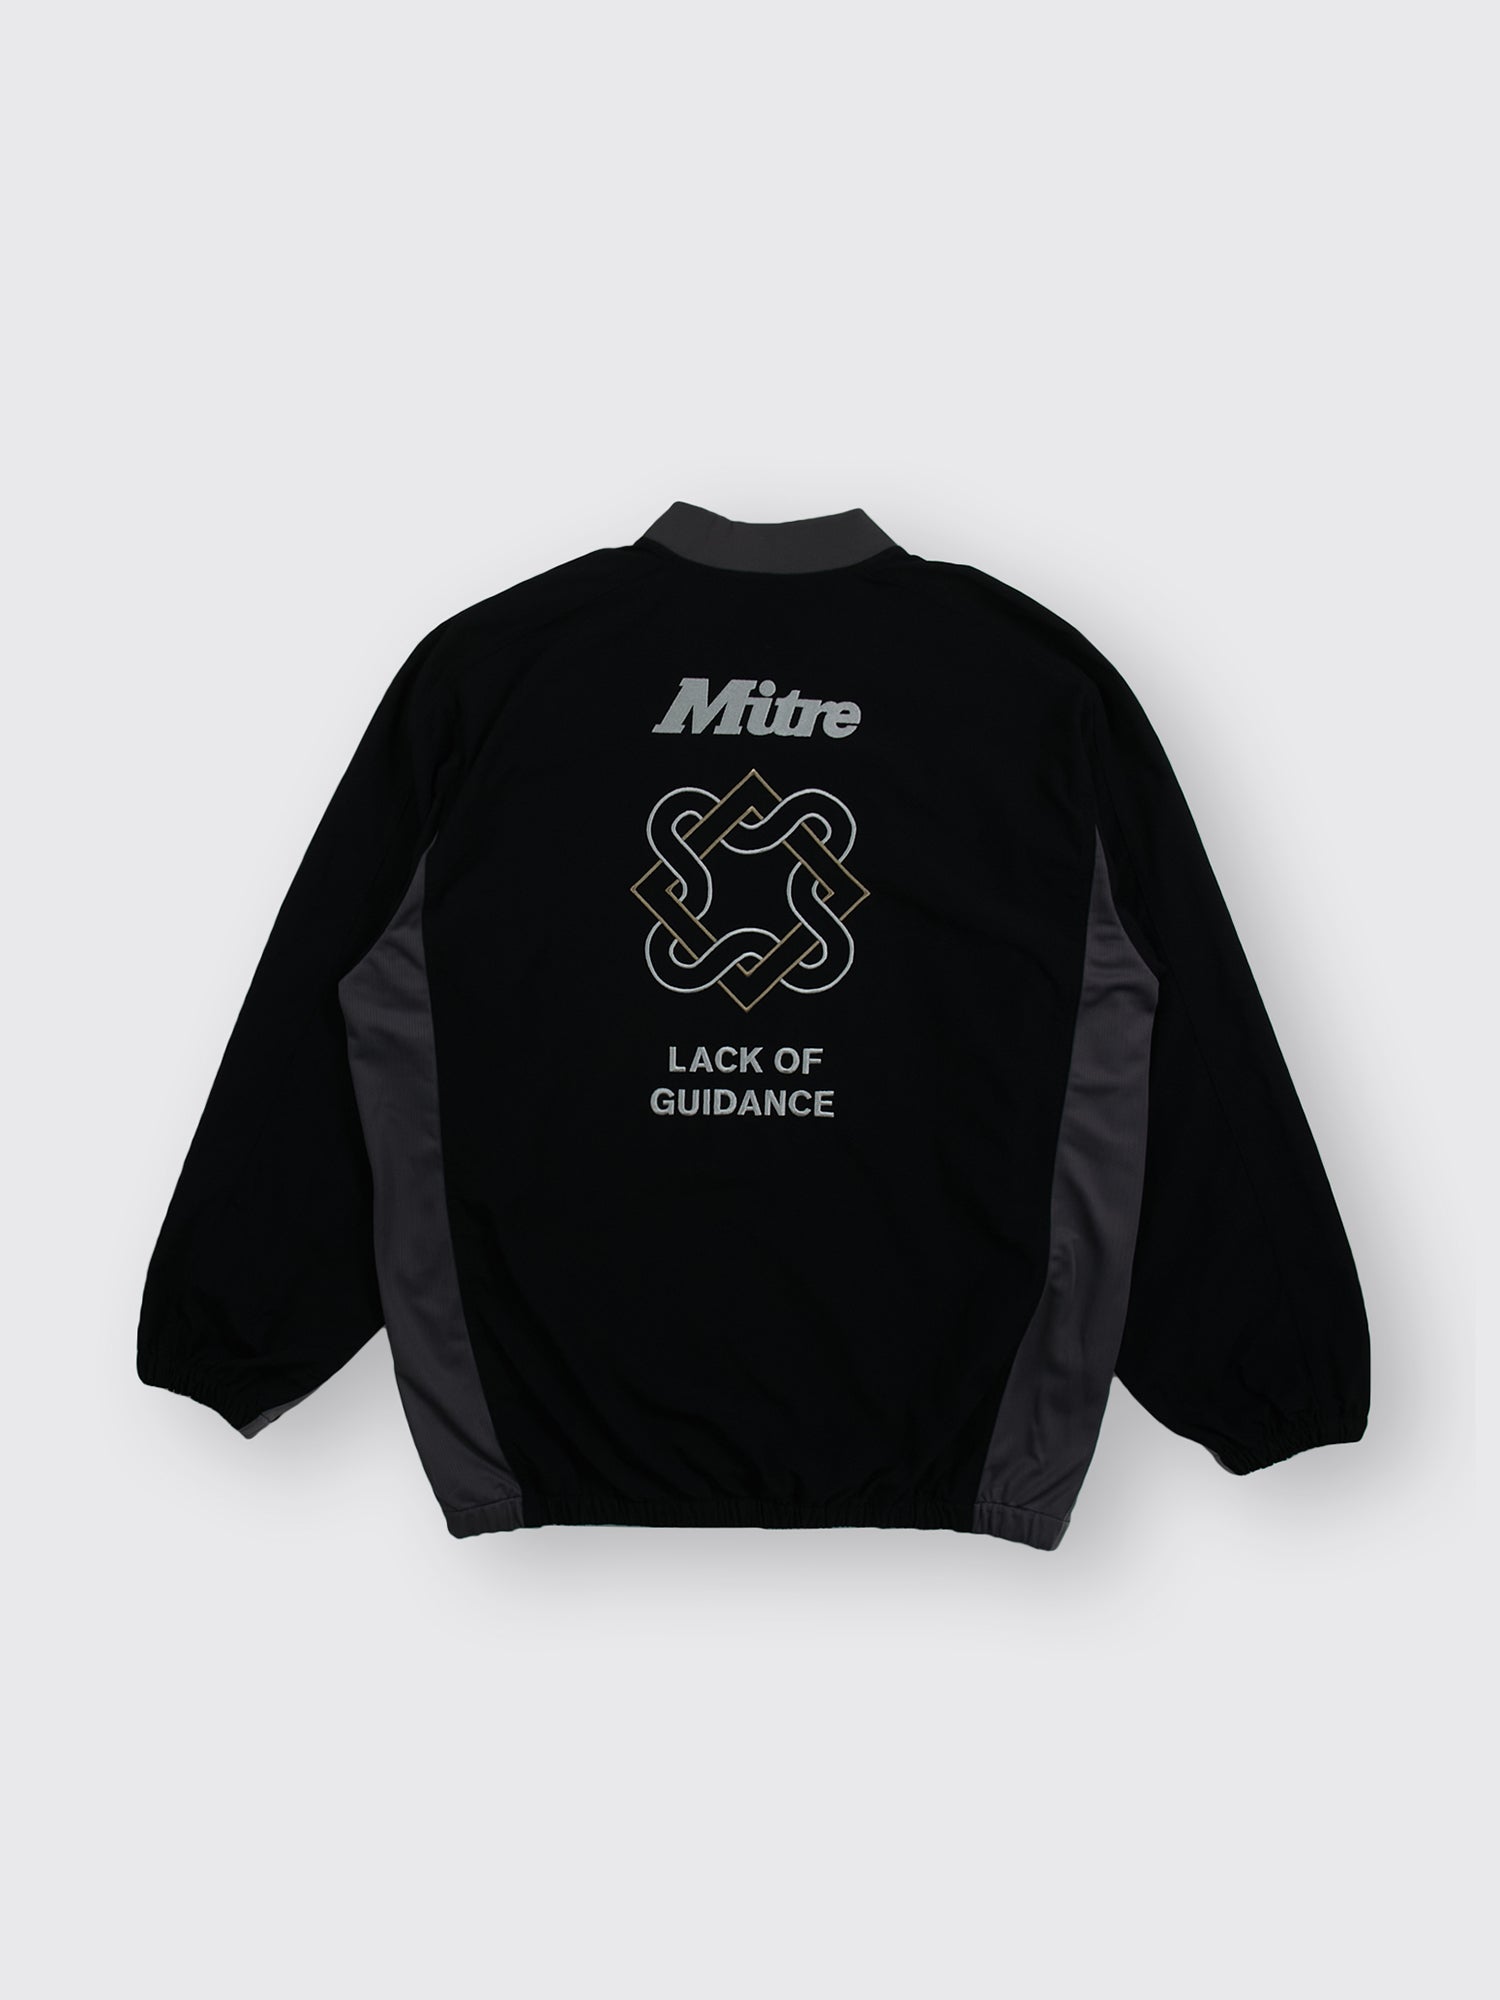 Lack of Guidance x Mitre Training Top